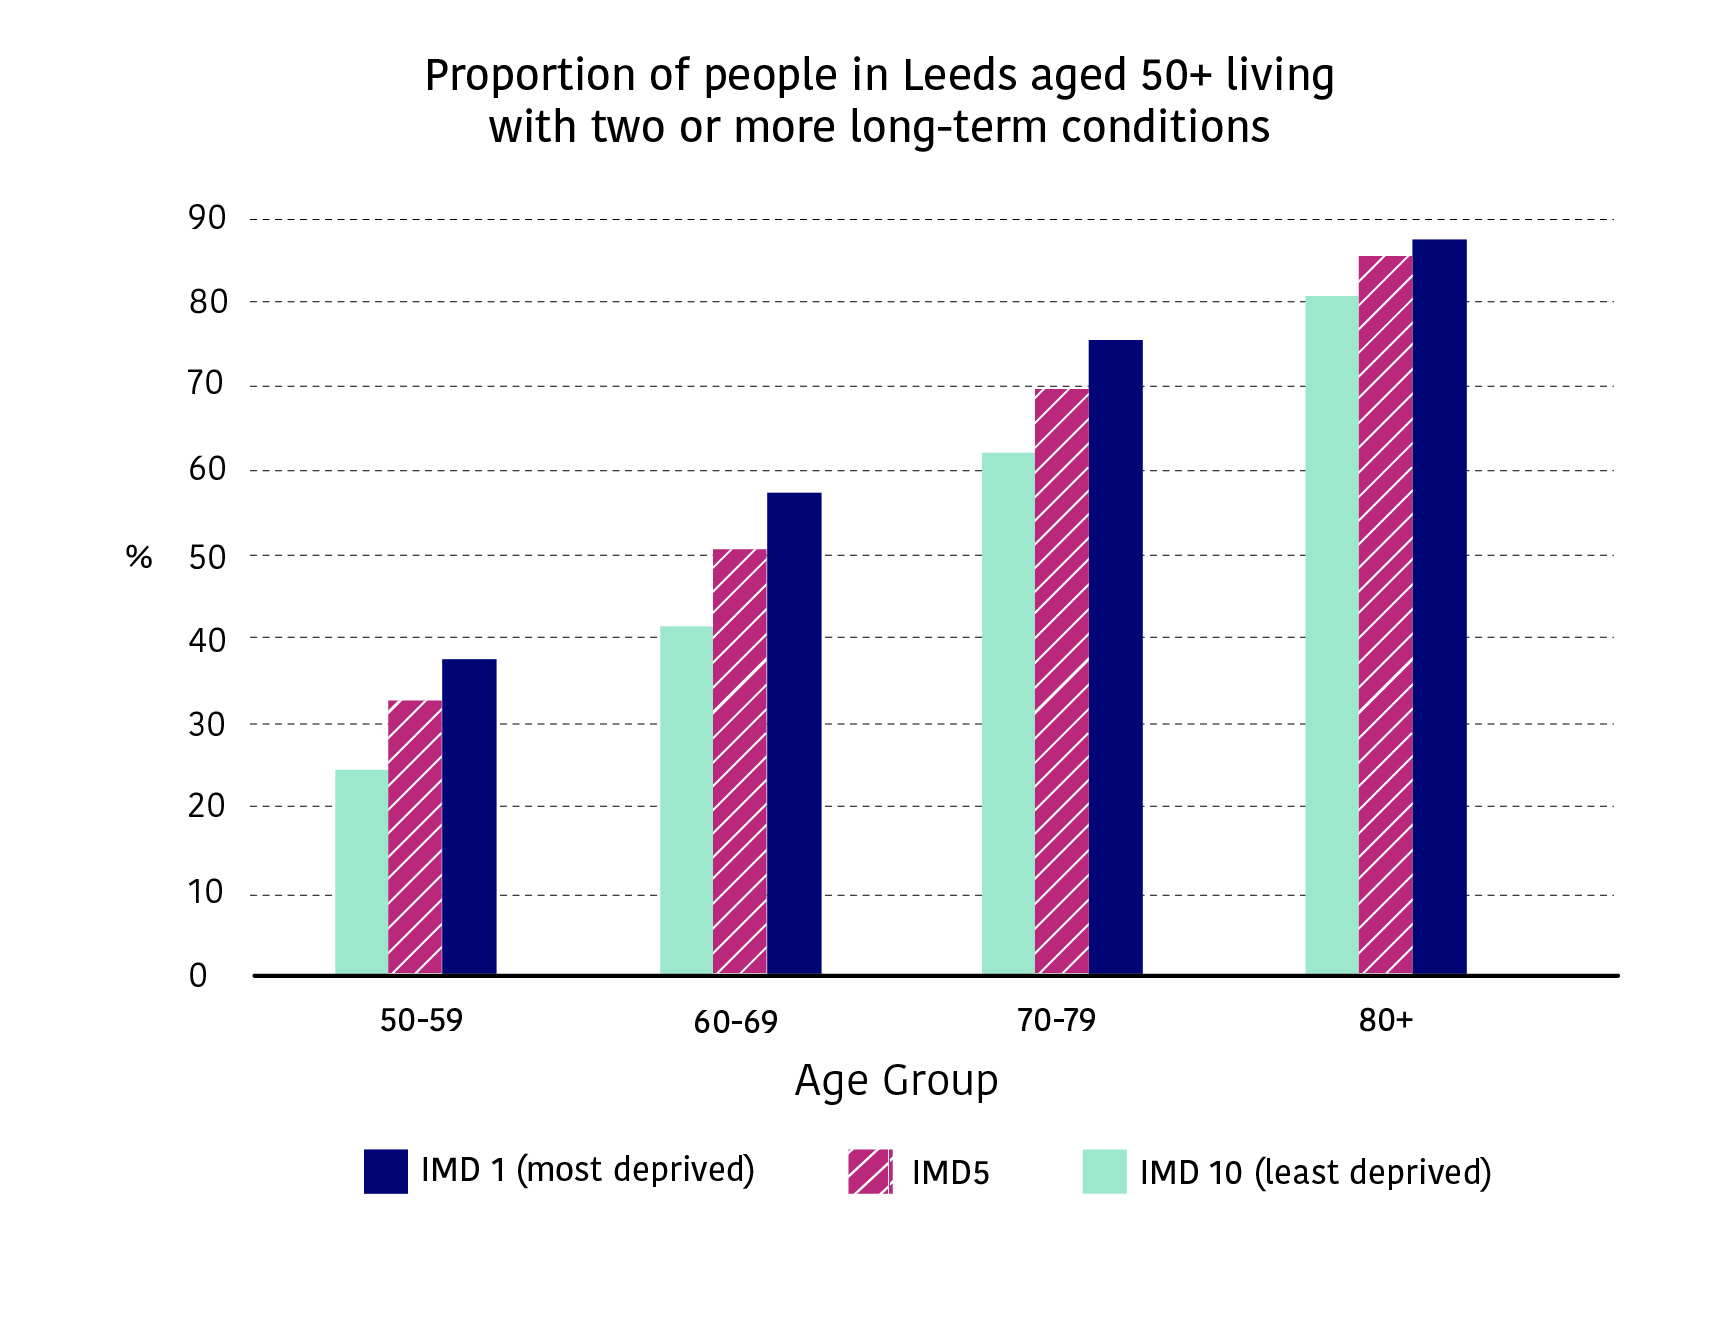 The bar chart shows the upwards trend in proportion of people in Leeds living with two or more long-term conditions as they age. The chart shows that higher proportions of people living in IMD10 have two or more long term conditions than those in IMD5 and IMD1, with IMD5 having the second highest proportion.